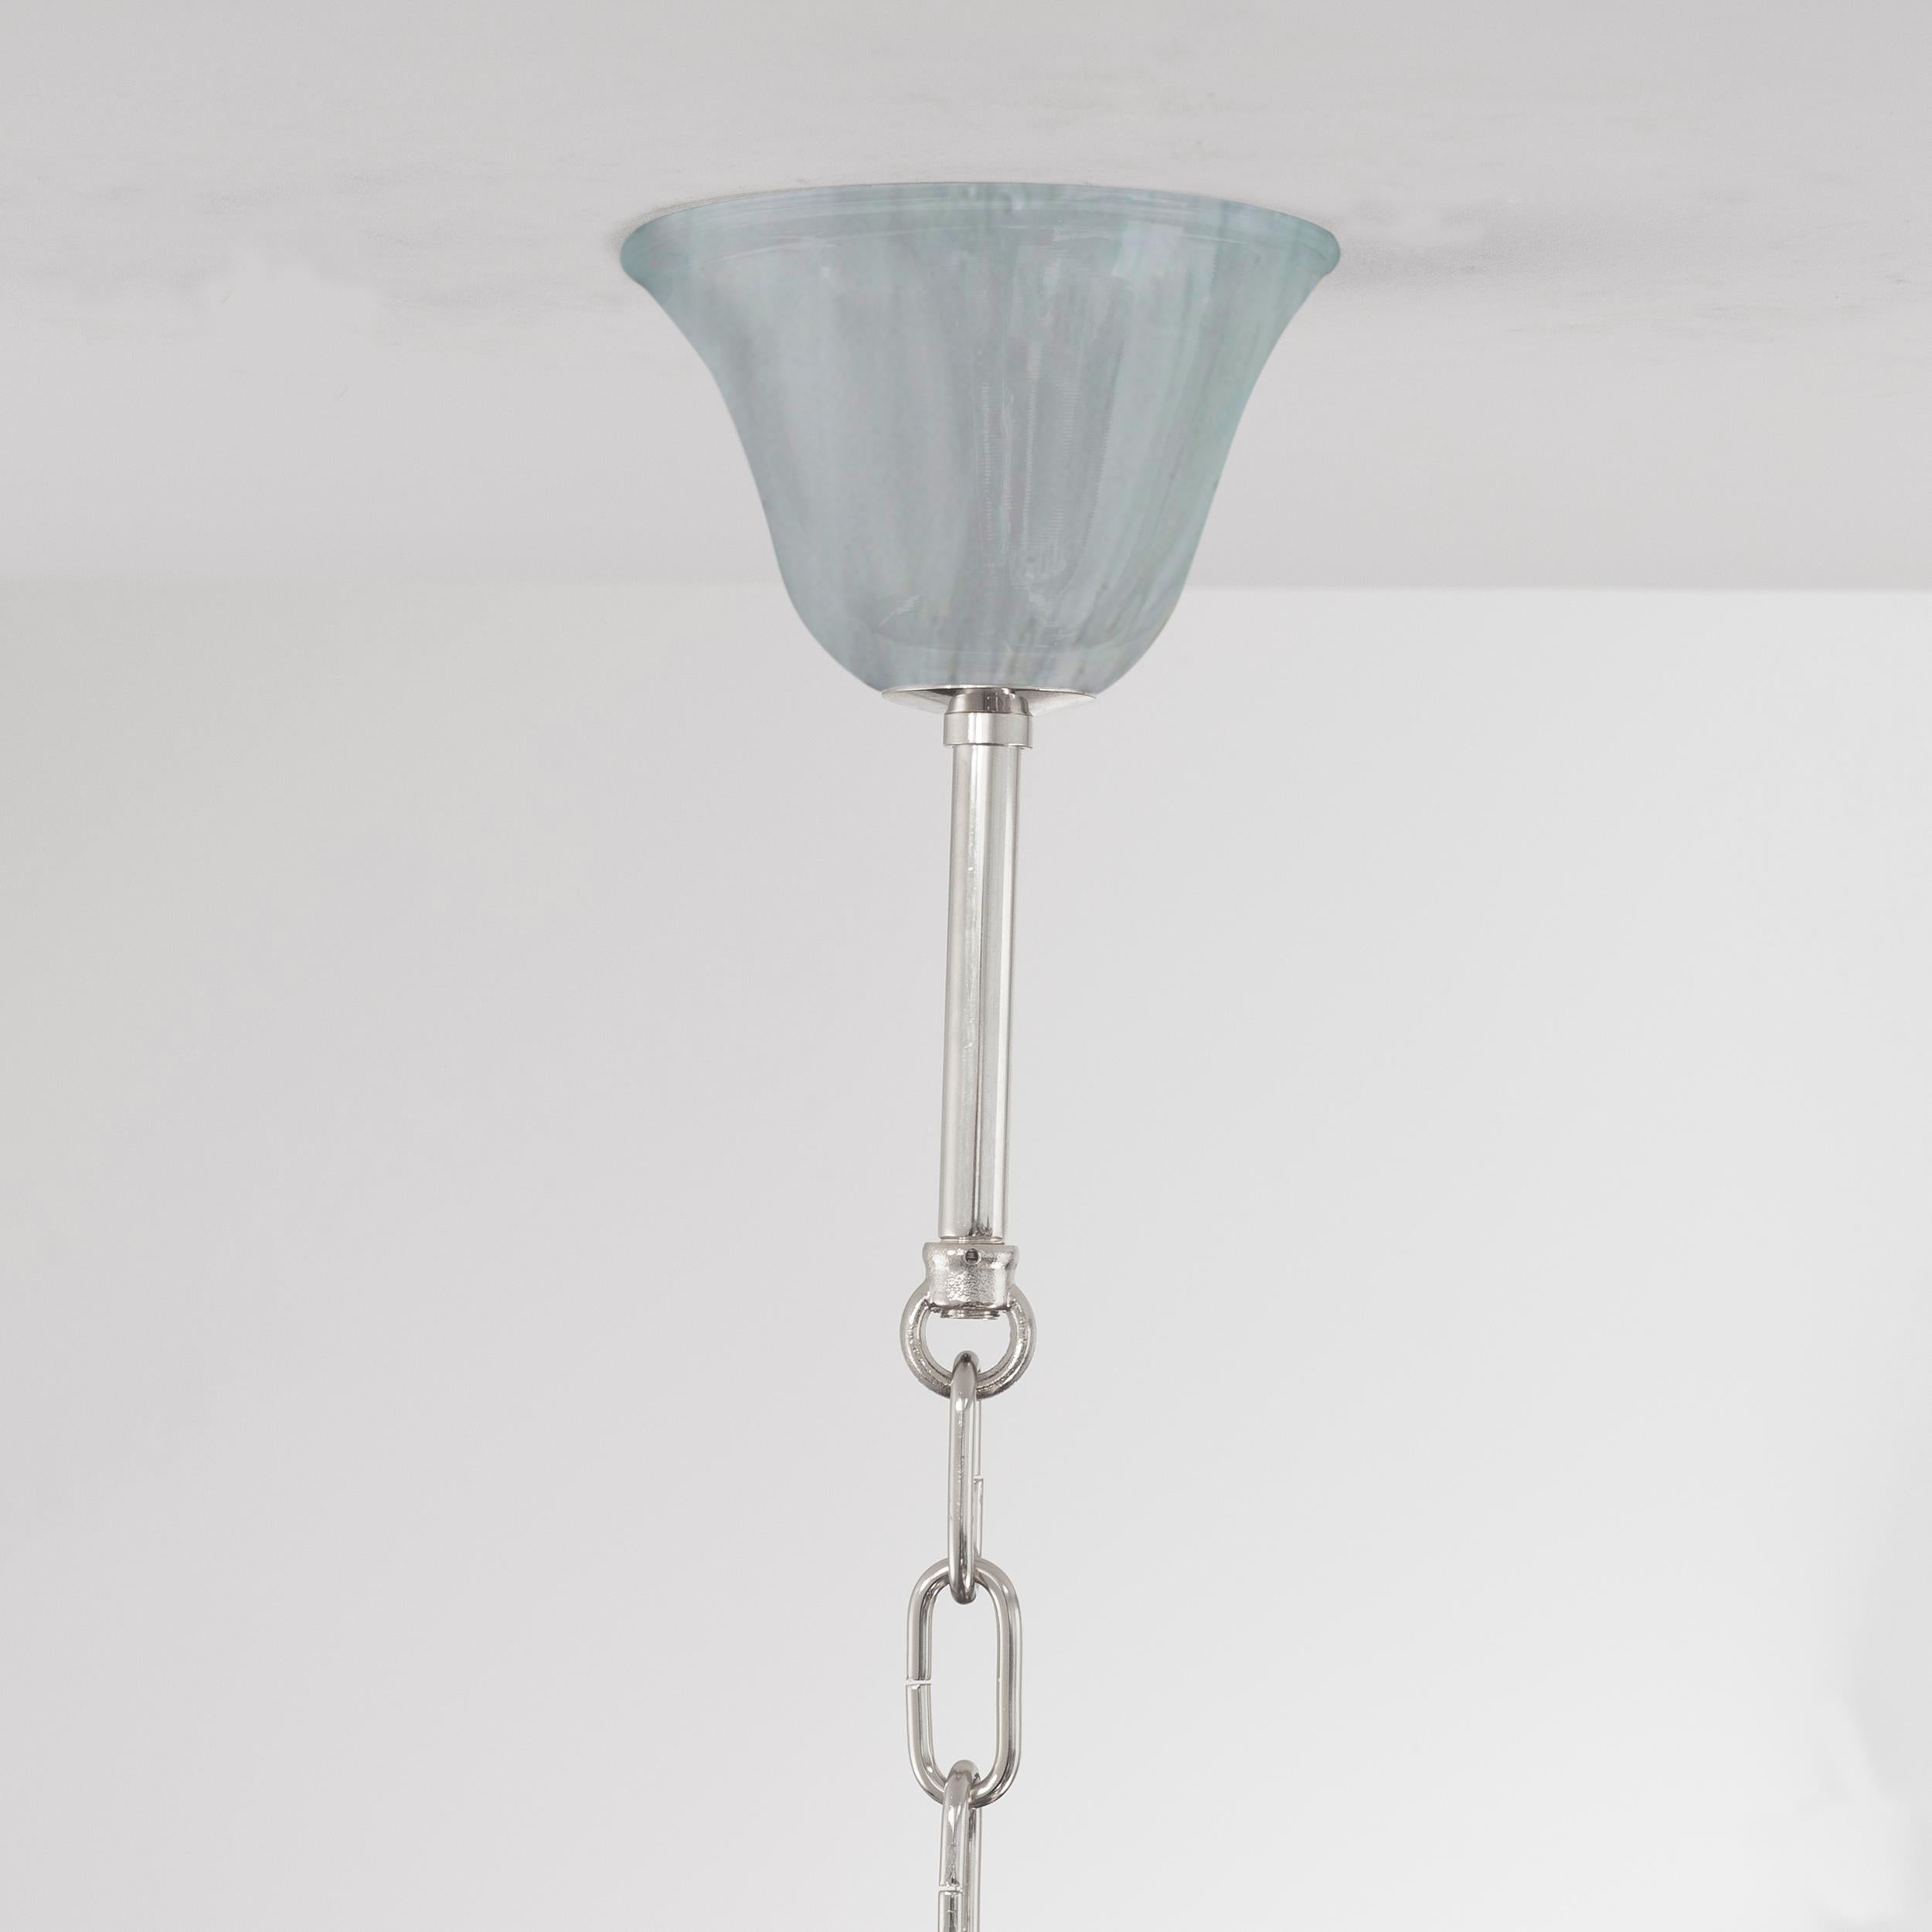 Simplicissimus Chandelier, 6 Arms grey green Murano Glass by Multiforme For Sale 1